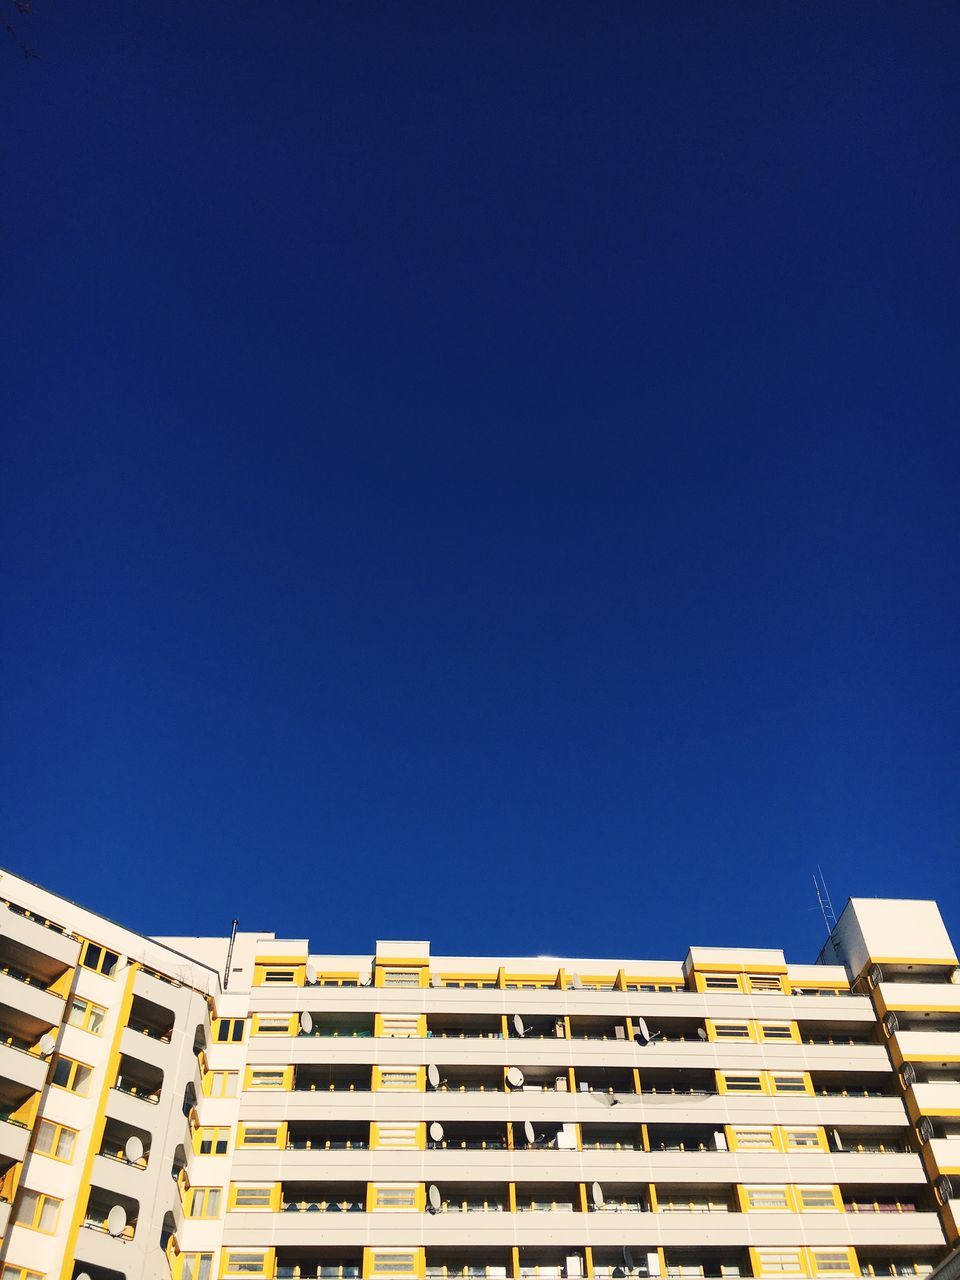 LOW ANGLE VIEW OF RESIDENTIAL BUILDINGS AGAINST BLUE SKY